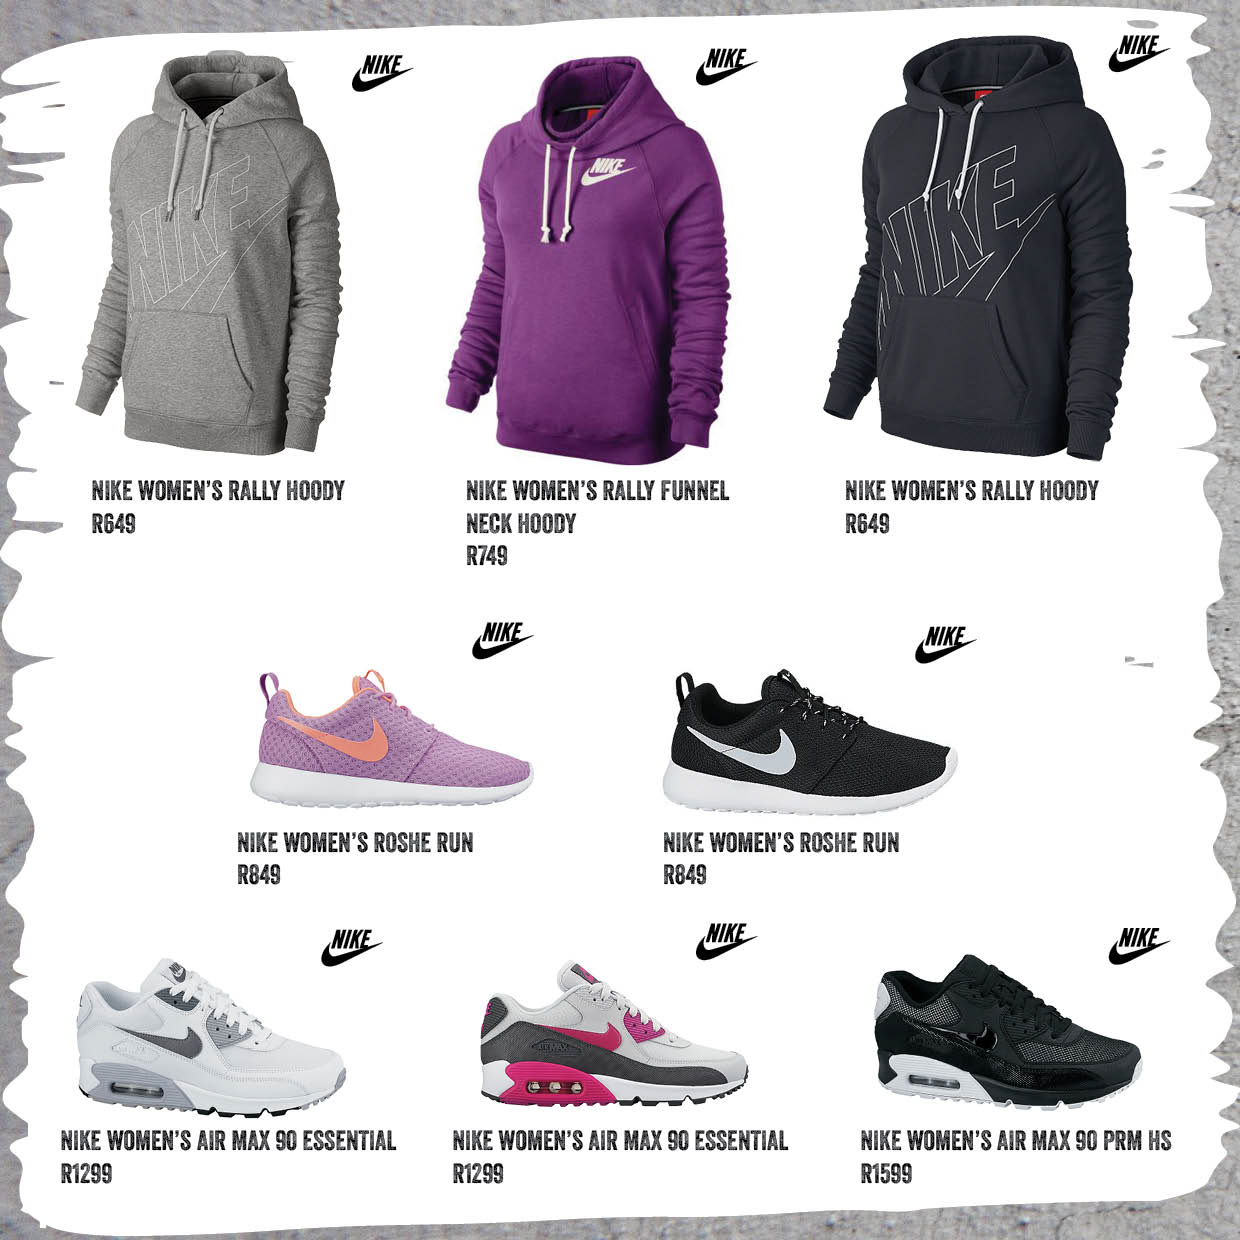 sportscene - ⚠️ STREETWEAR ESSENTIALS ON SALE! ⚠️ You don't want to miss  sportscene's sale - in-store and online, while stocks last. Shop your  favourite brands including Nike, Fila, adidas Originals, Puma